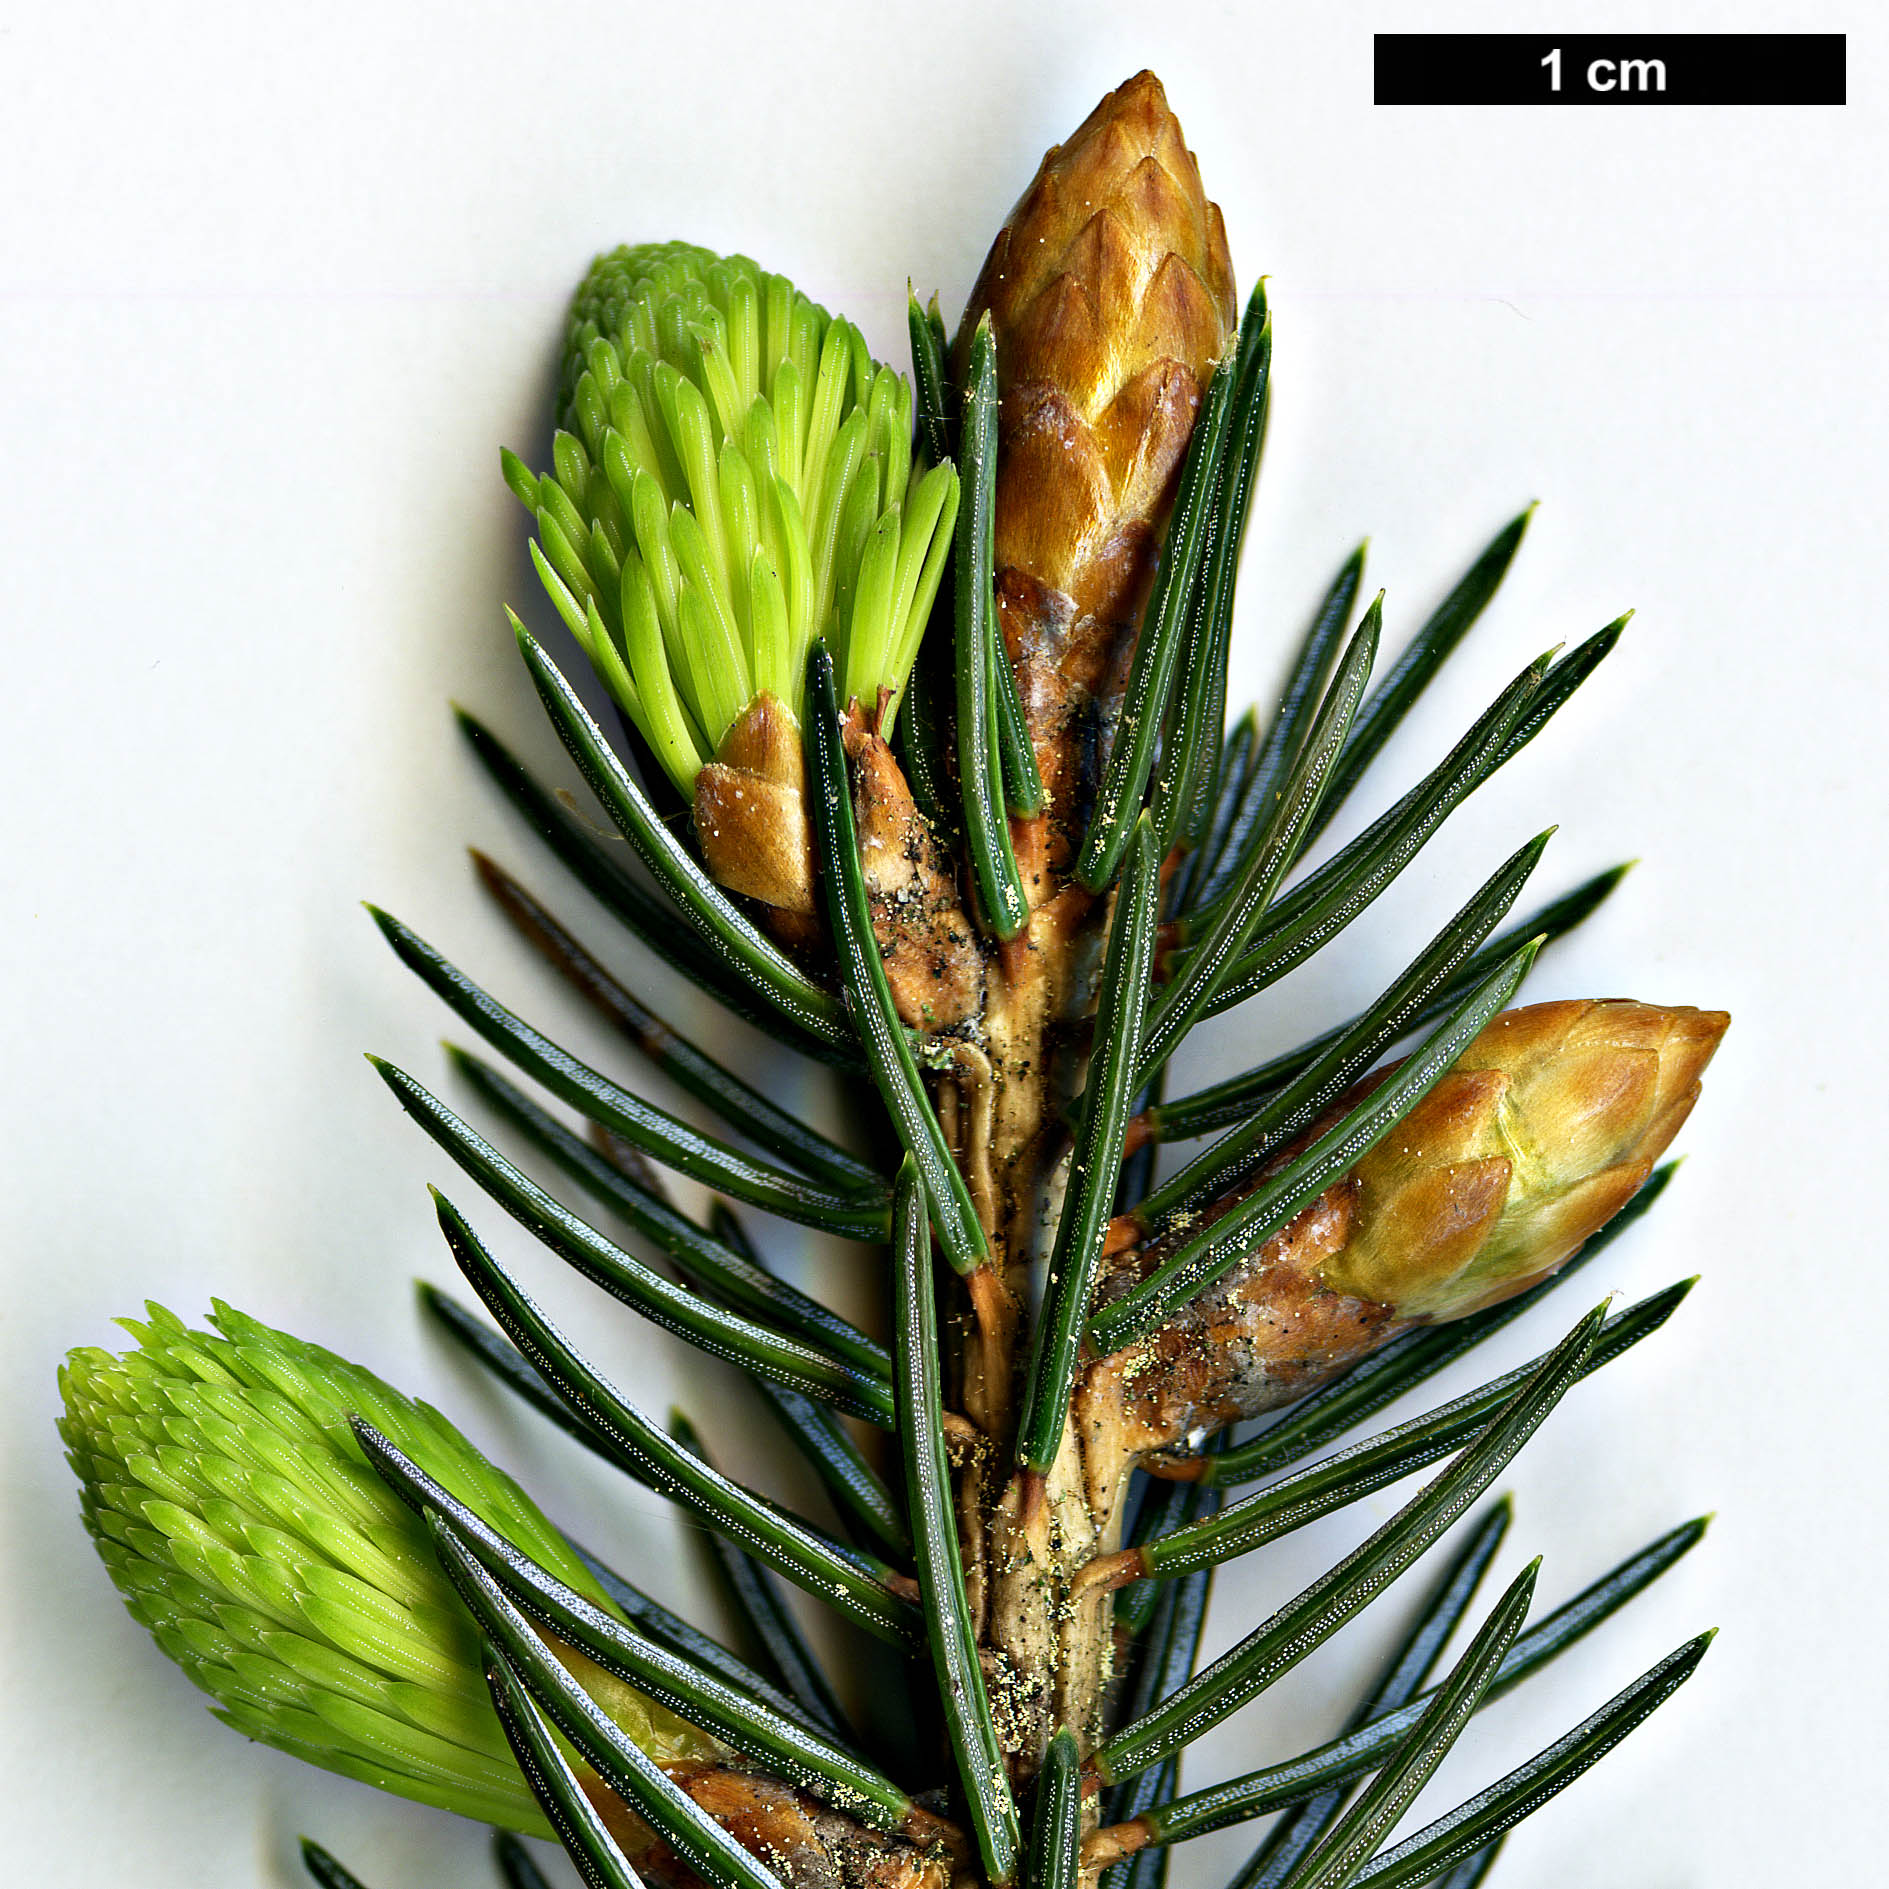 High resolution image: Family: Pinaceae - Genus: Picea - Taxon: likiangensis